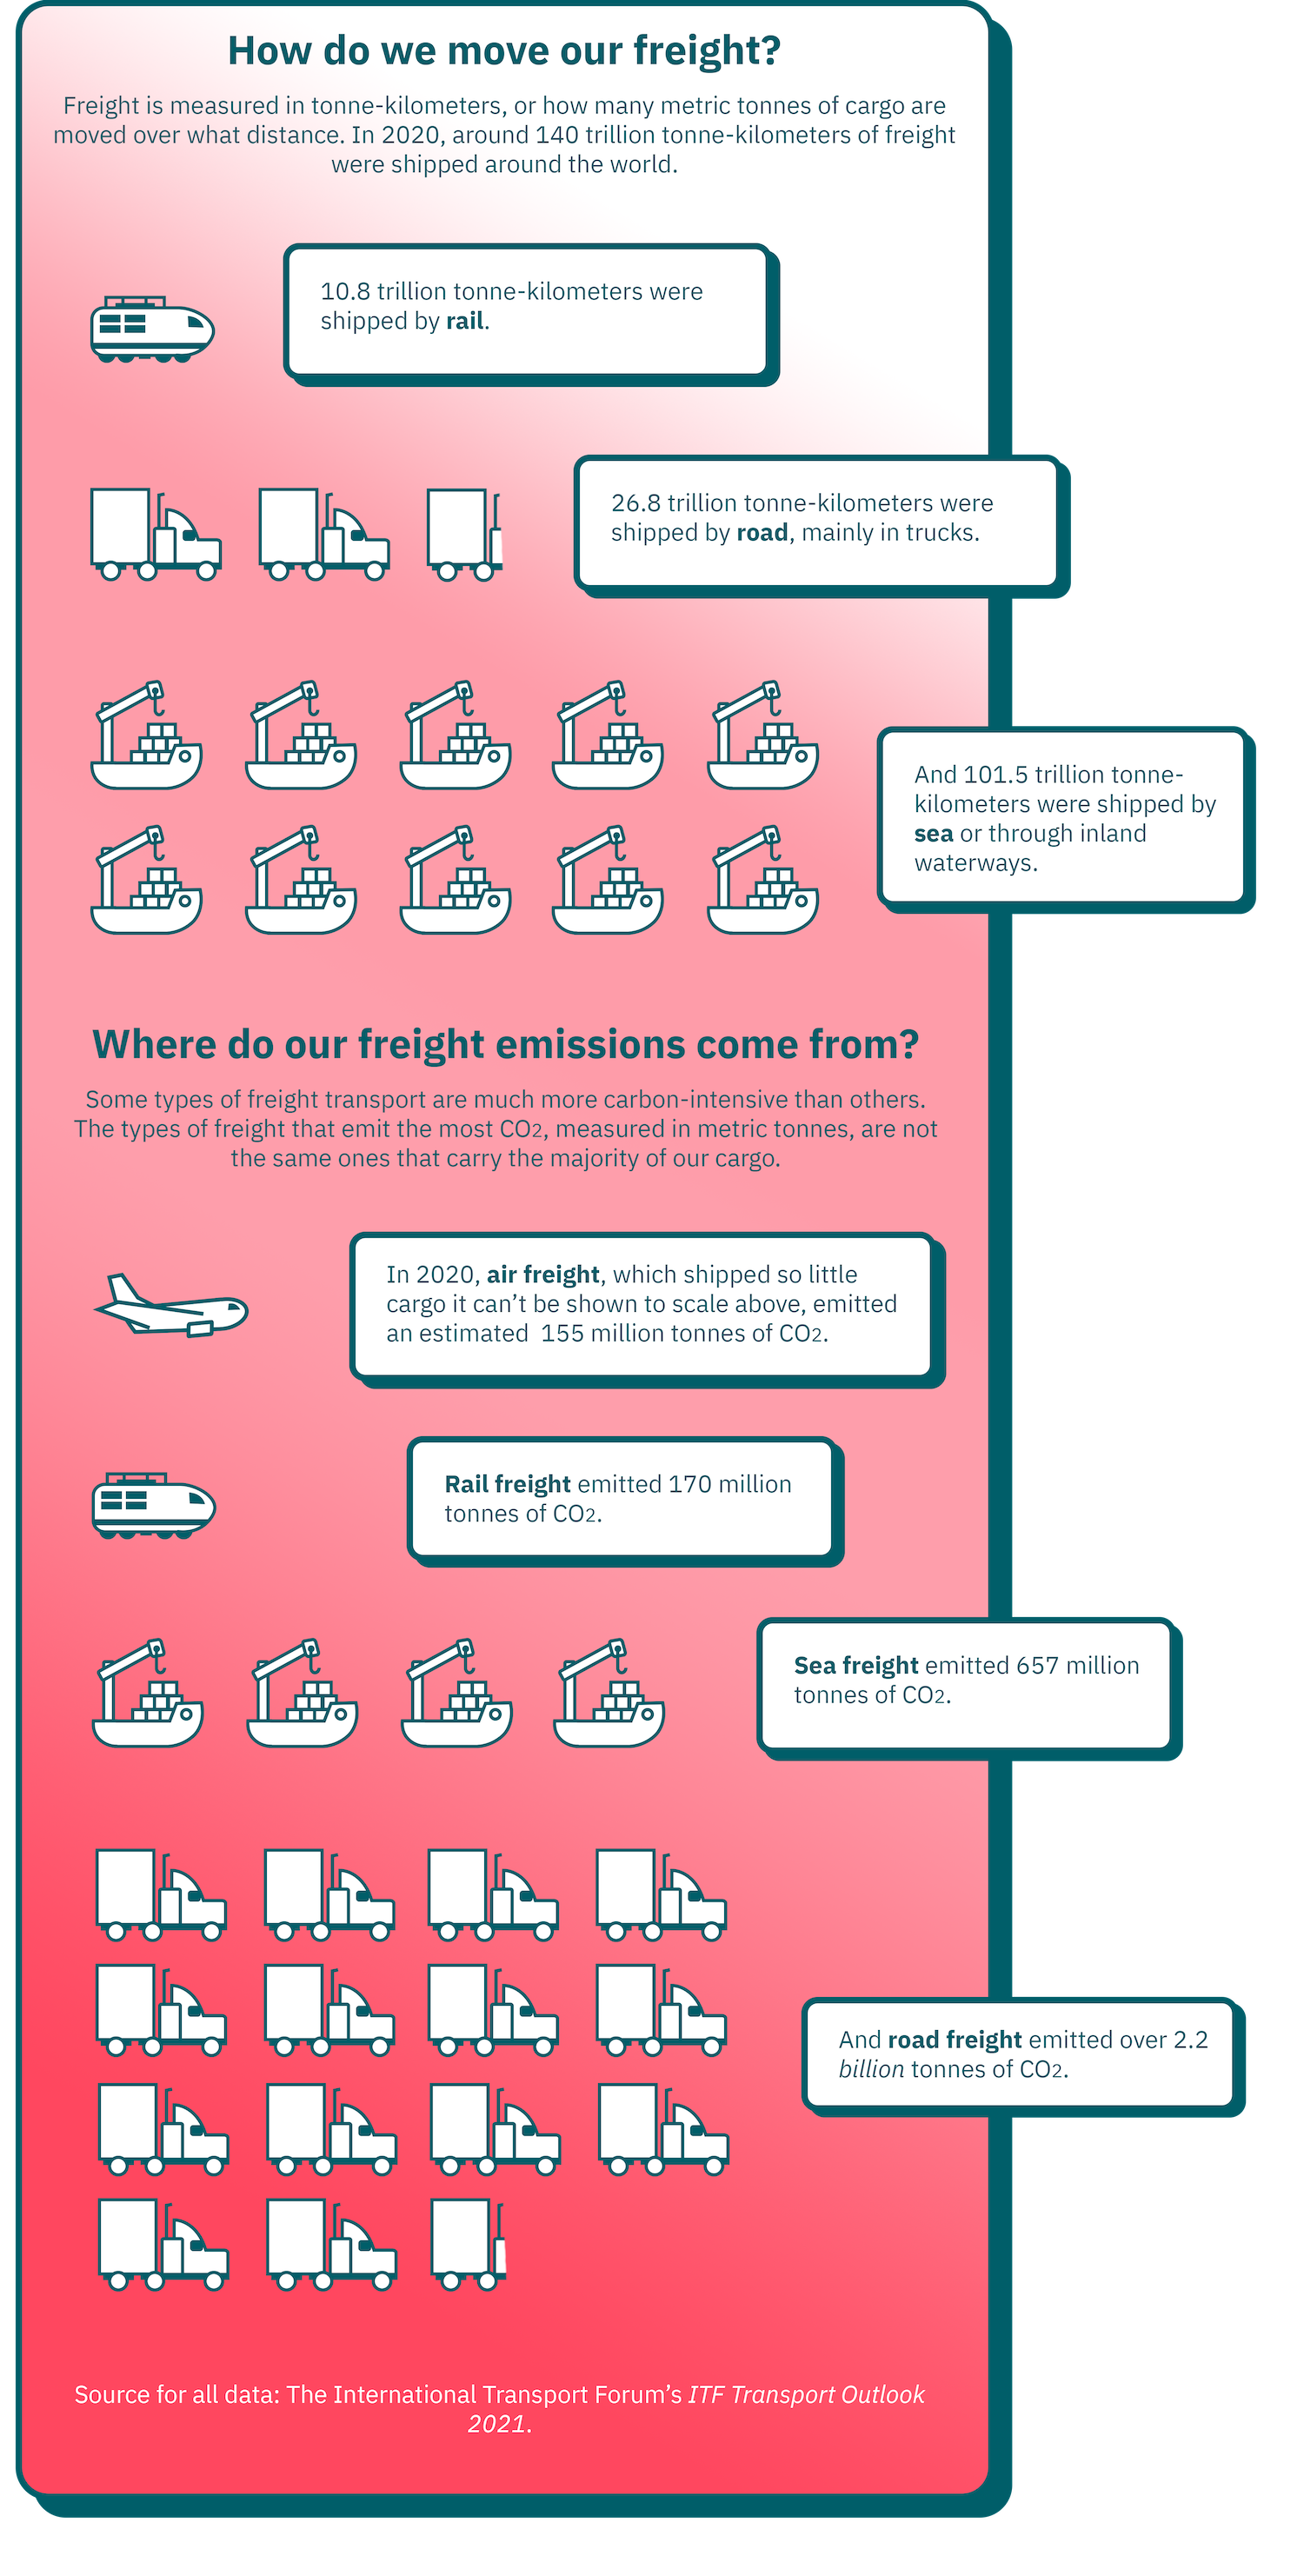 Infographic: How do we move our freight? Freight is measured in tonne-kilometers, or how many metric tonnes of cargo are moved over what distance. In 2020, around 140 billion tonne-kilometers of freight were shipped around the world. Some types of freight transport are much more carbon-intensive than others. The types of freight that emit the most CO2, measured in metric tonnes, are not the same ones that carry the majority of our cargo.